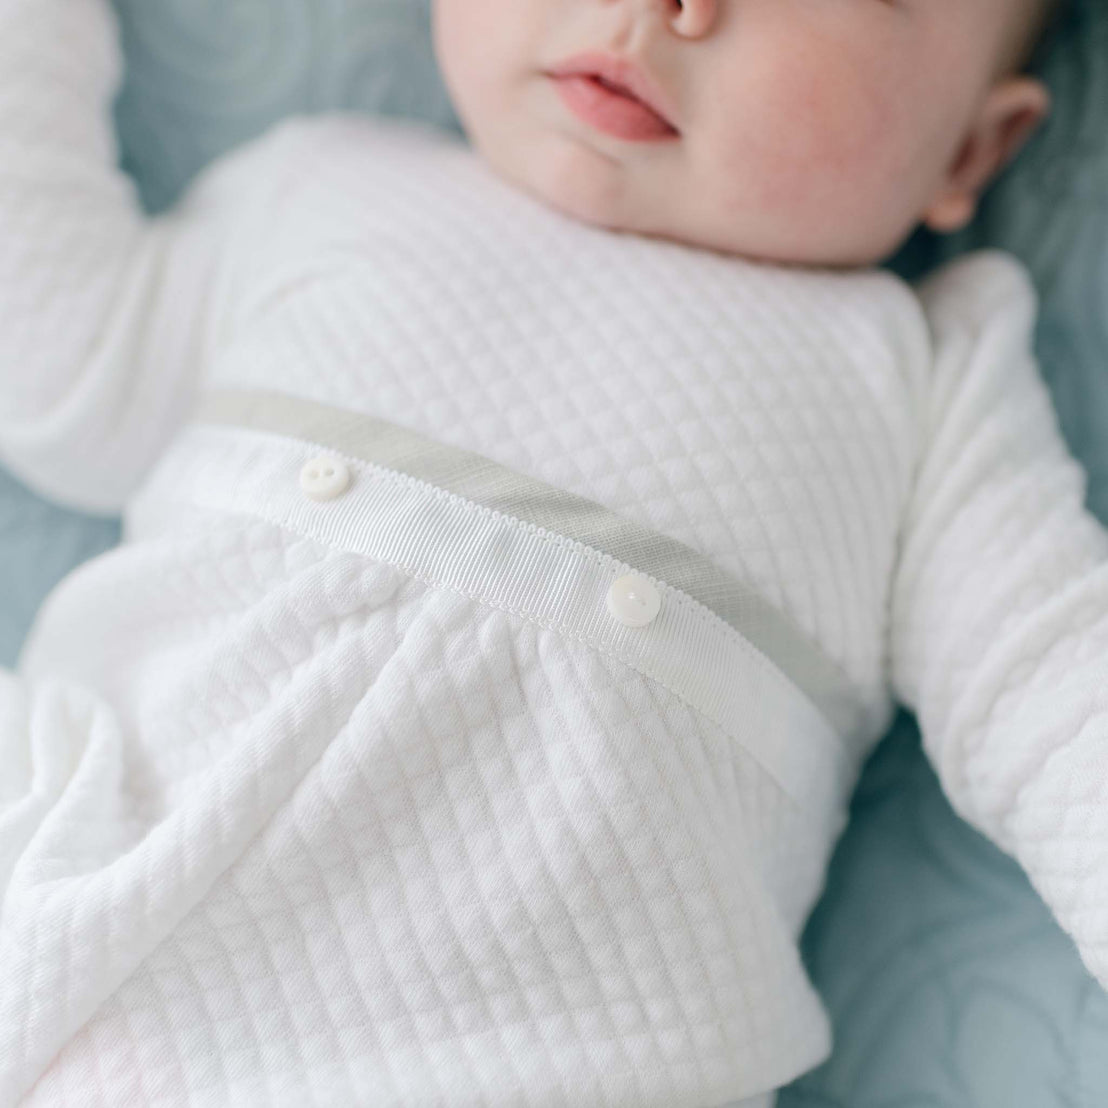 A close-up of a baby wearing a Grayson Quilted Romper made of soft white quilted cotton. The long-sleeve newborn romper features textured fabric and a light band around the waist adorned with two small buttons. Only the baby's torso and part of the face are visible, with the baby lying on a light blue surface.